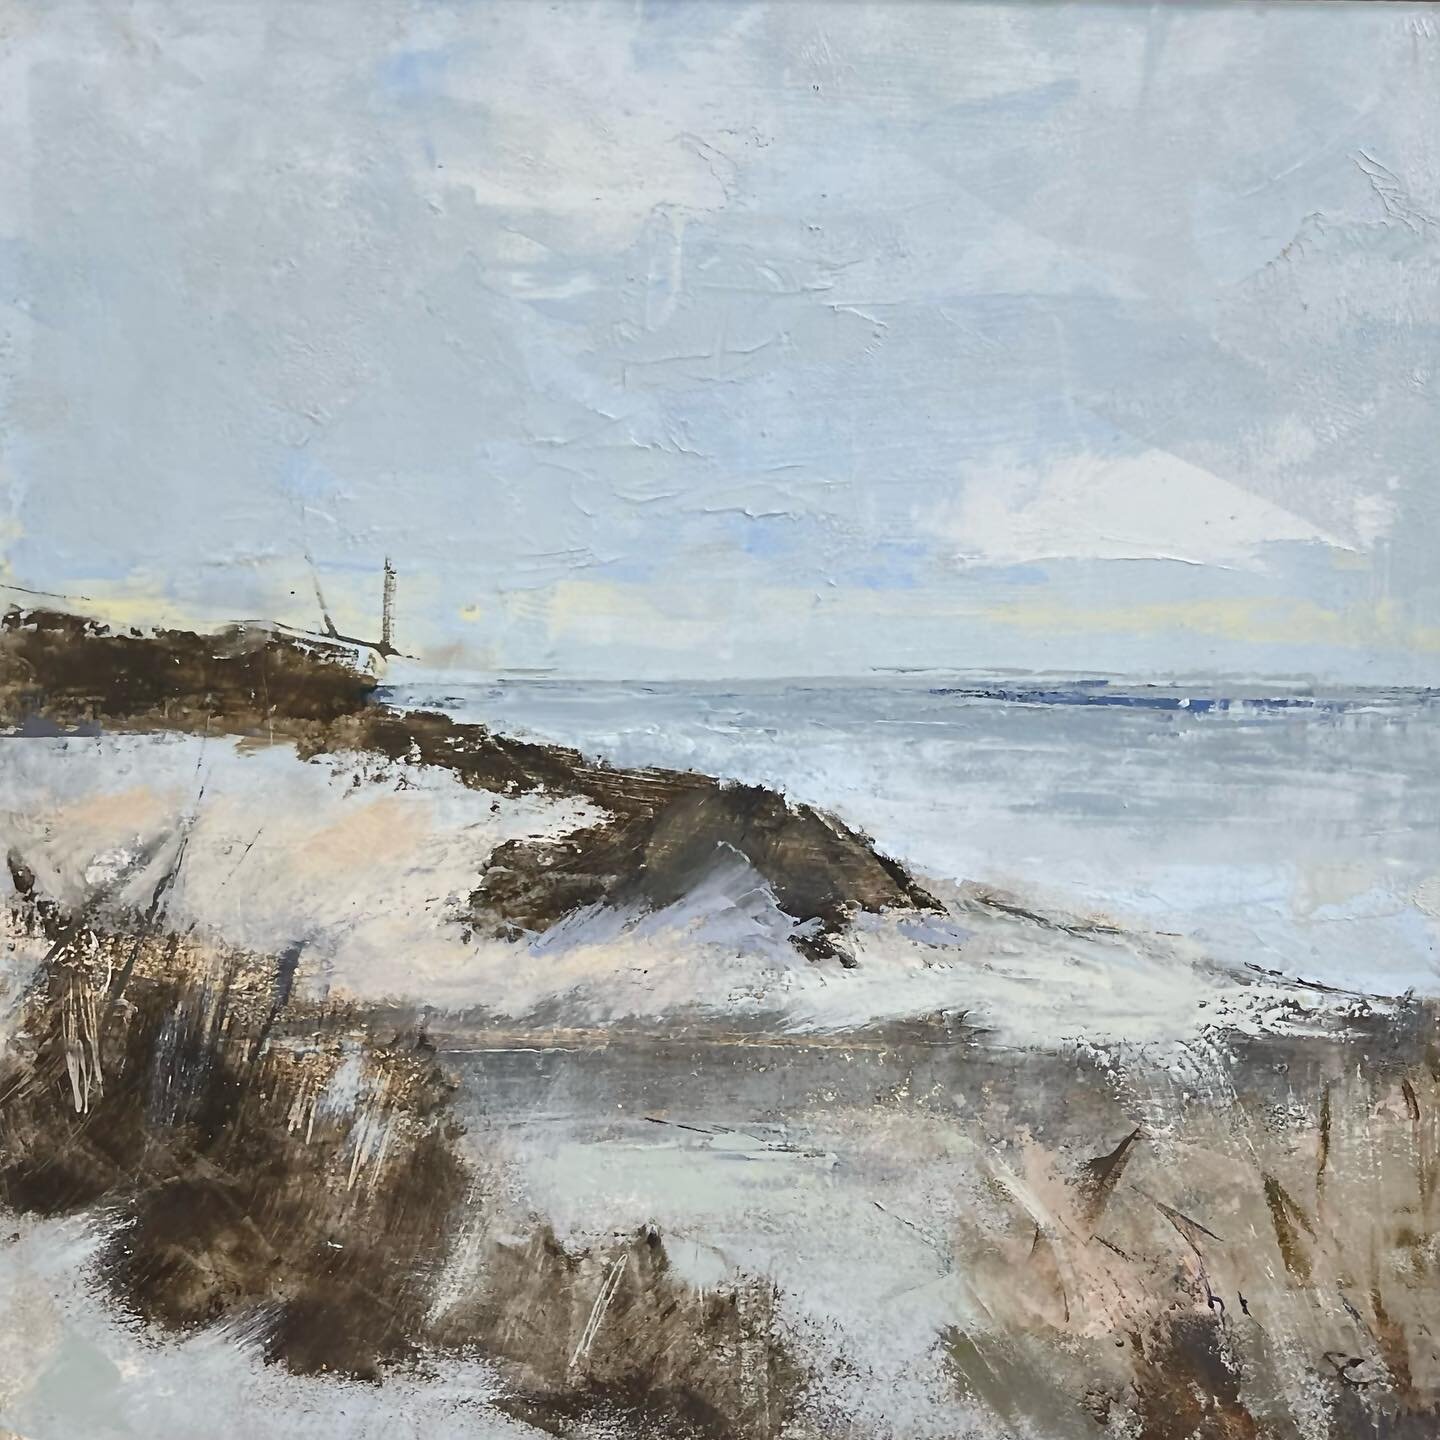 &lsquo;The blue went out of the sea&rsquo; . V. Woolf.  Oil, pigments, cold wax, no brush on a board. #nantucketart #coastallandscape